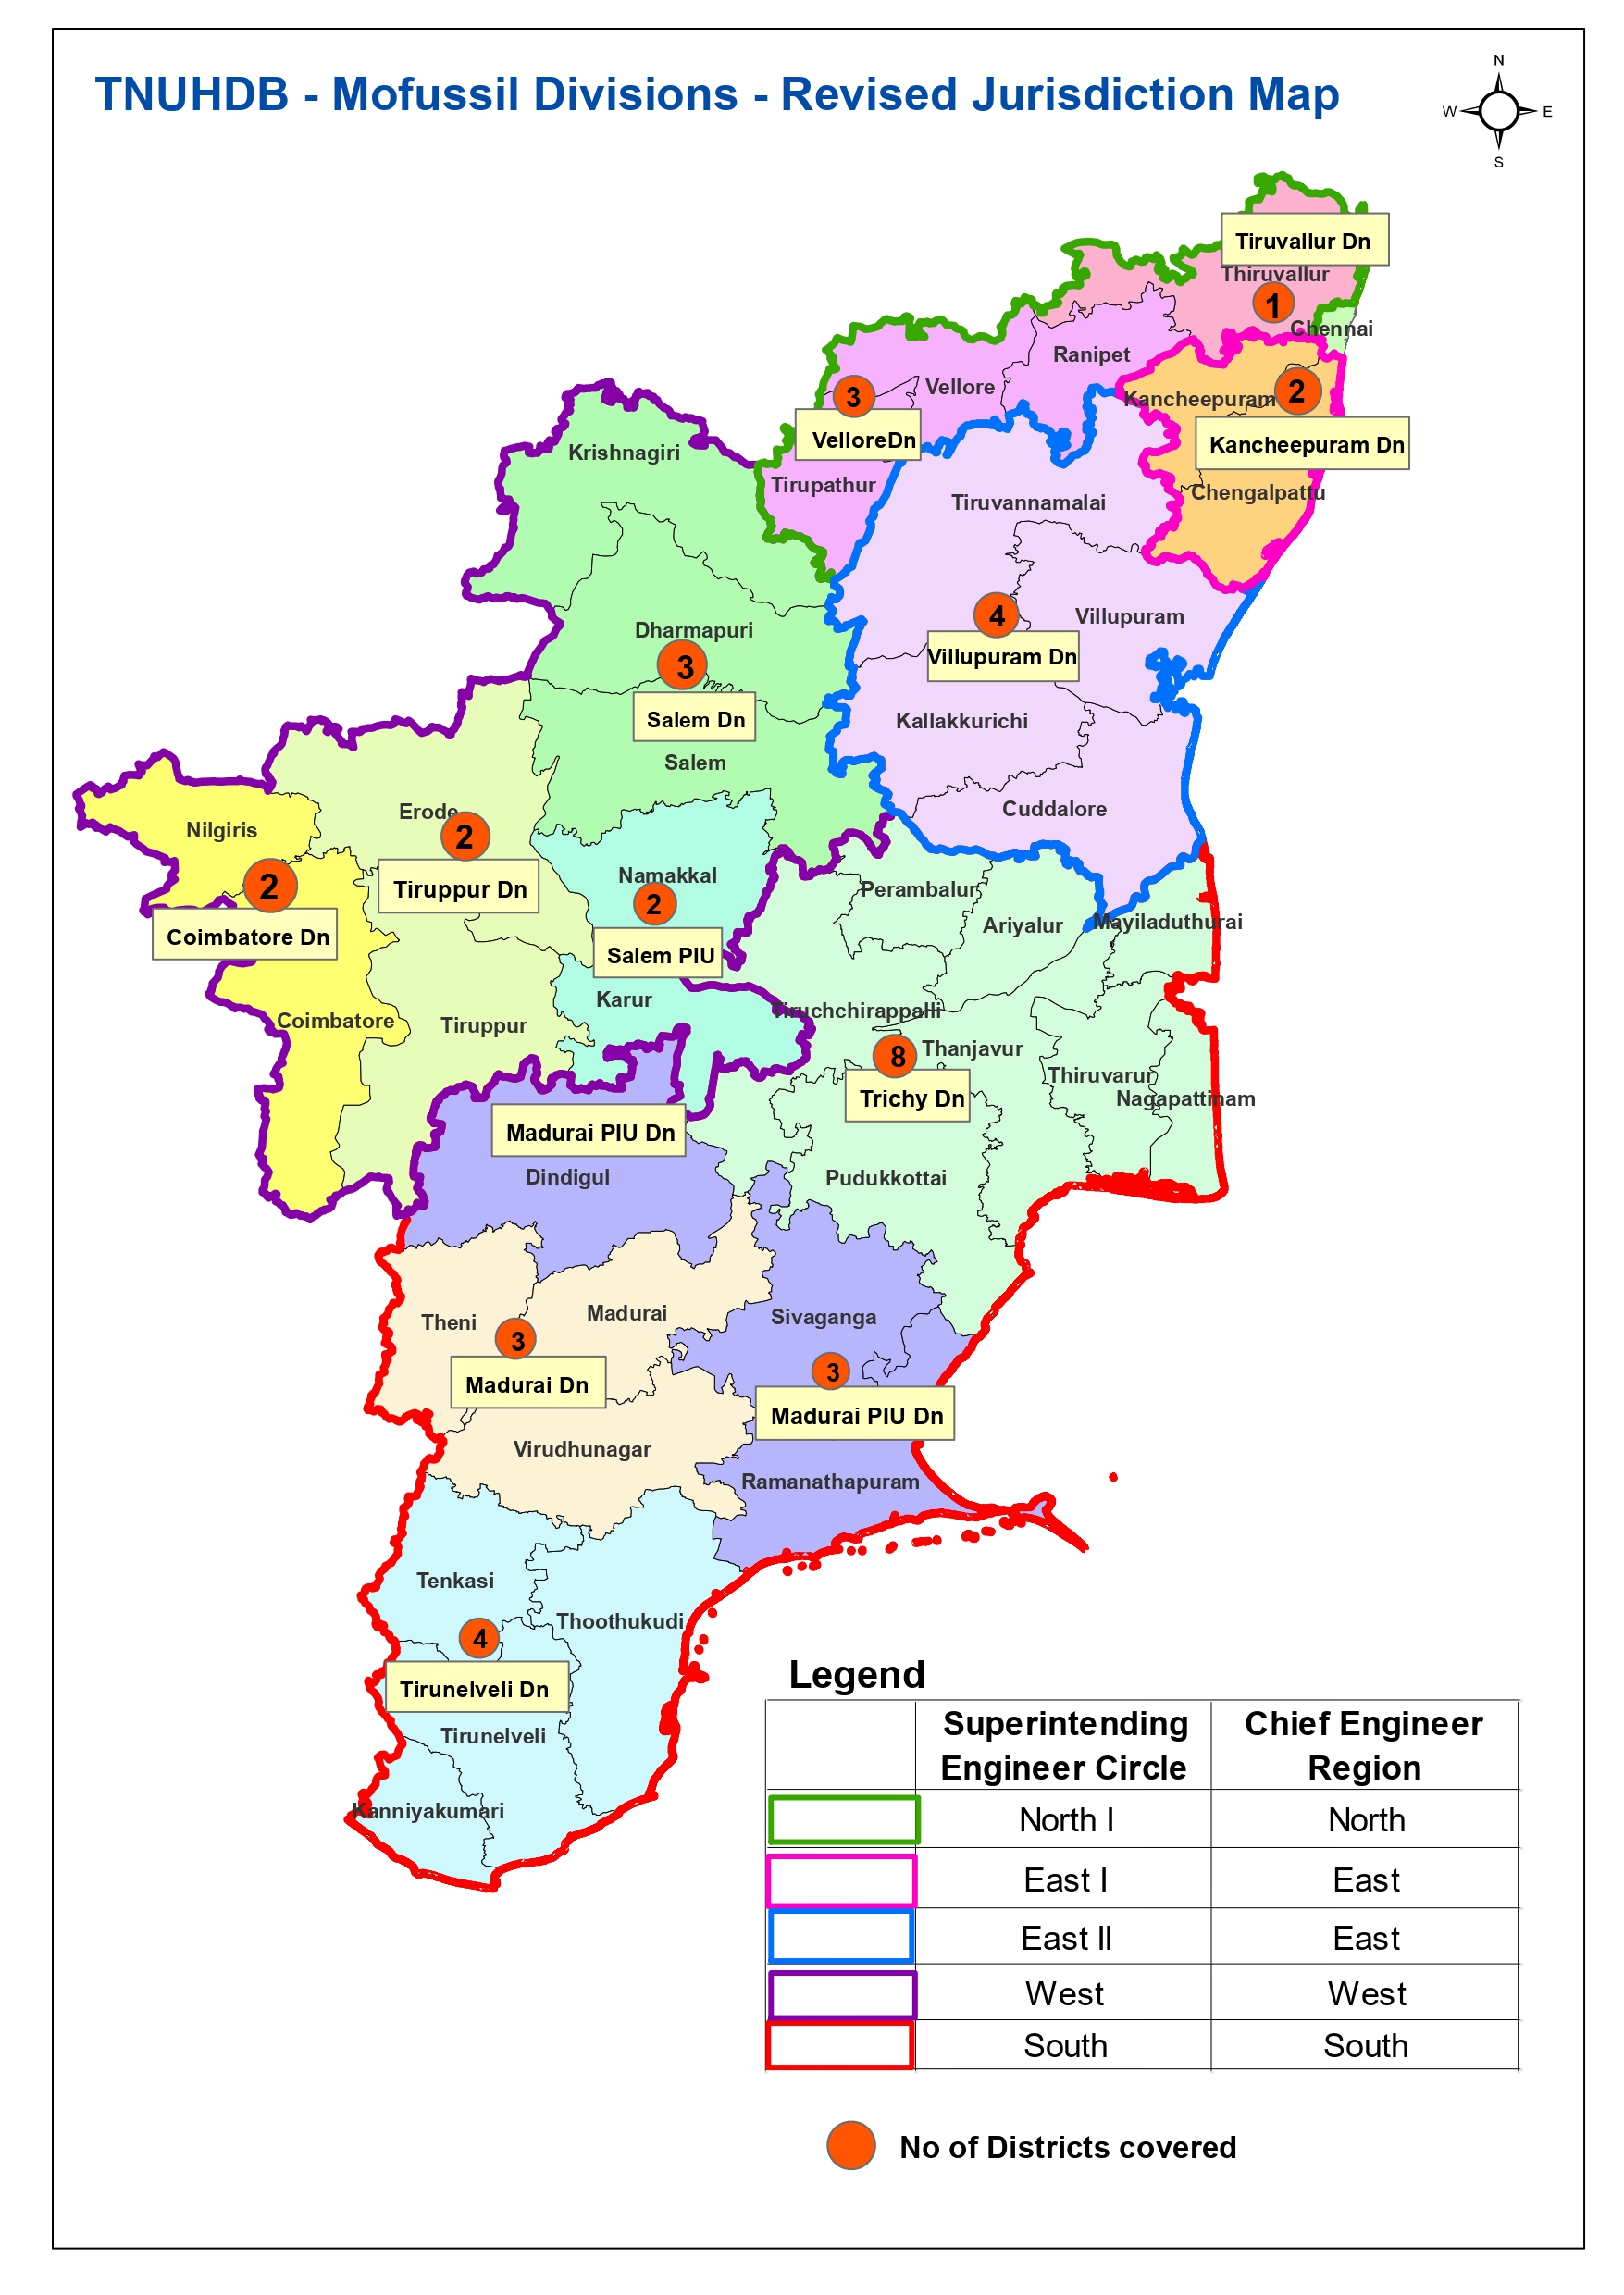 Mofussil Divisions